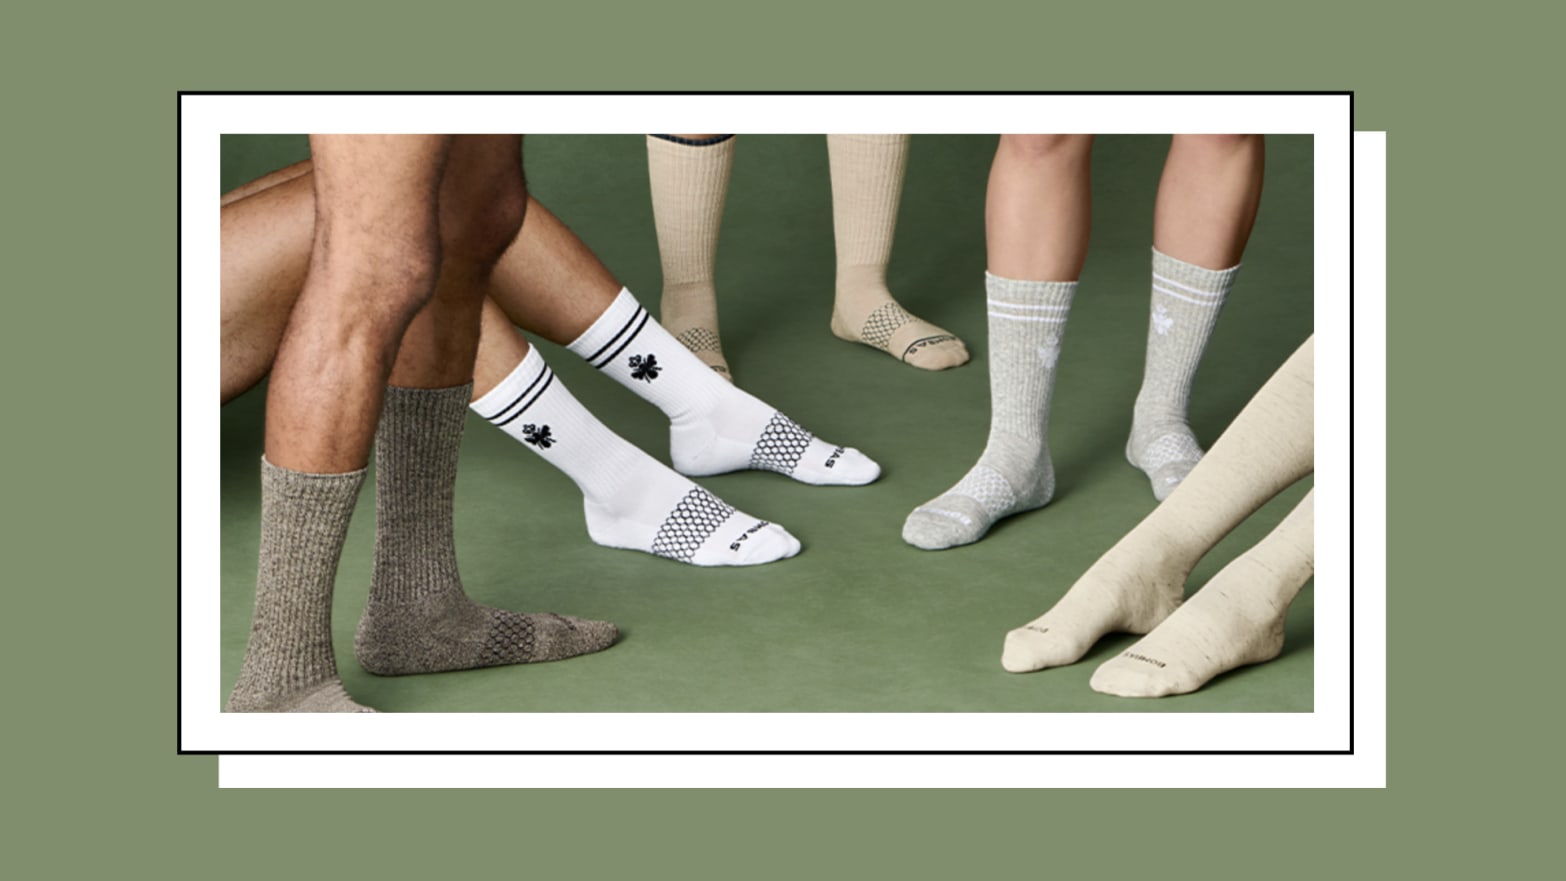 Bombas Offers New Spring Sock Collection with a One-for-One Donation Program